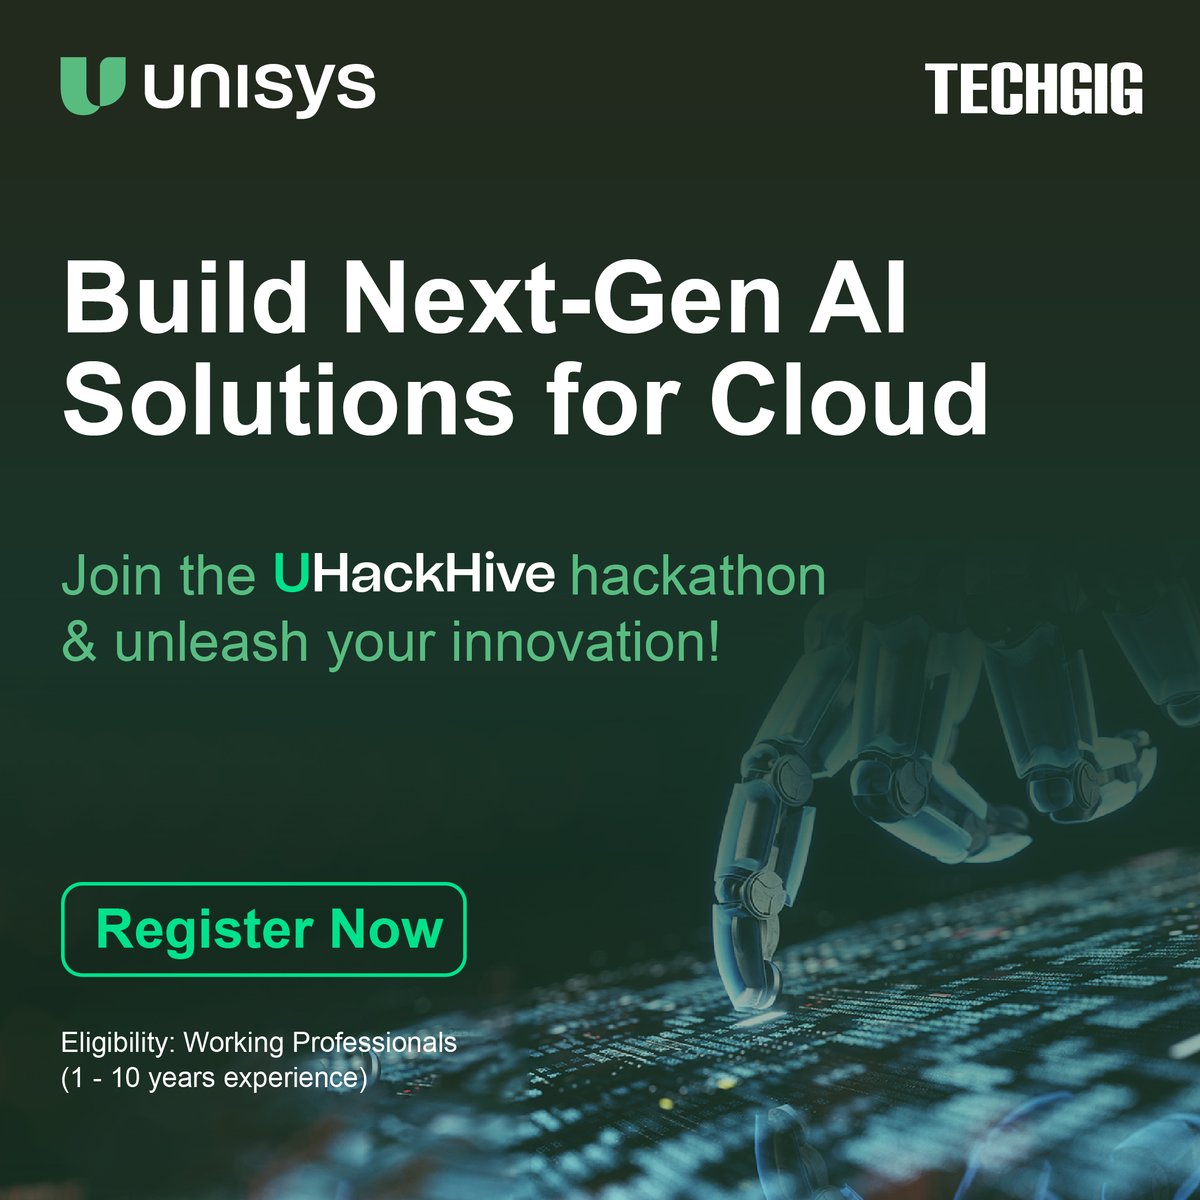 Dive into the future of innovation with #UHackHive! Join @unisys cloud-based, AI-focused hackathon and unleash your creativity to develop groundbreaking AI-driven solutions.

Register now: bit.ly/3QankuL

#AI #CloudComputing #Innovation